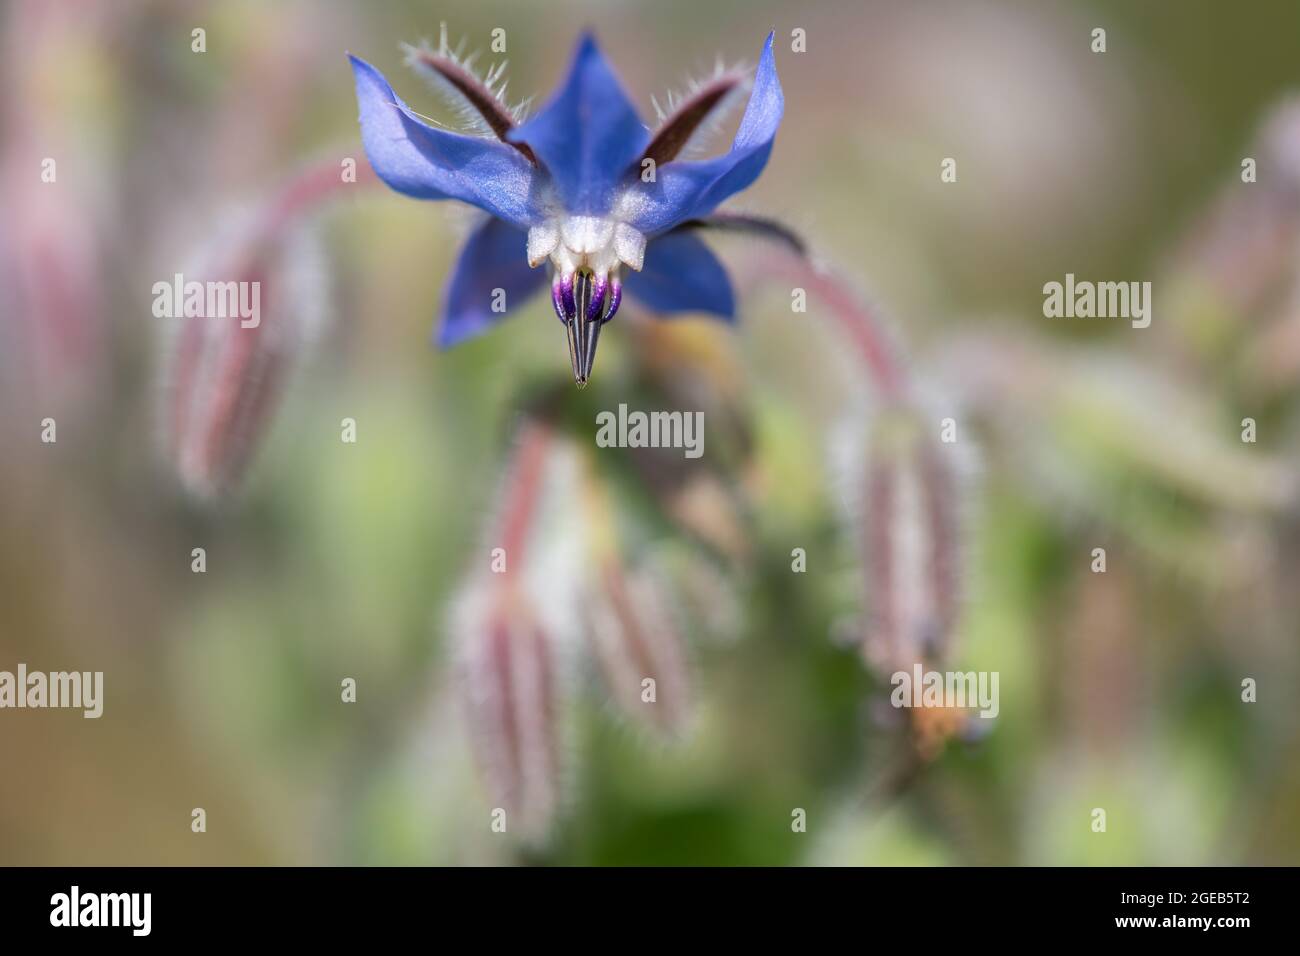 Close up of a borage (borago officinalis) flower in bloom Stock Photo